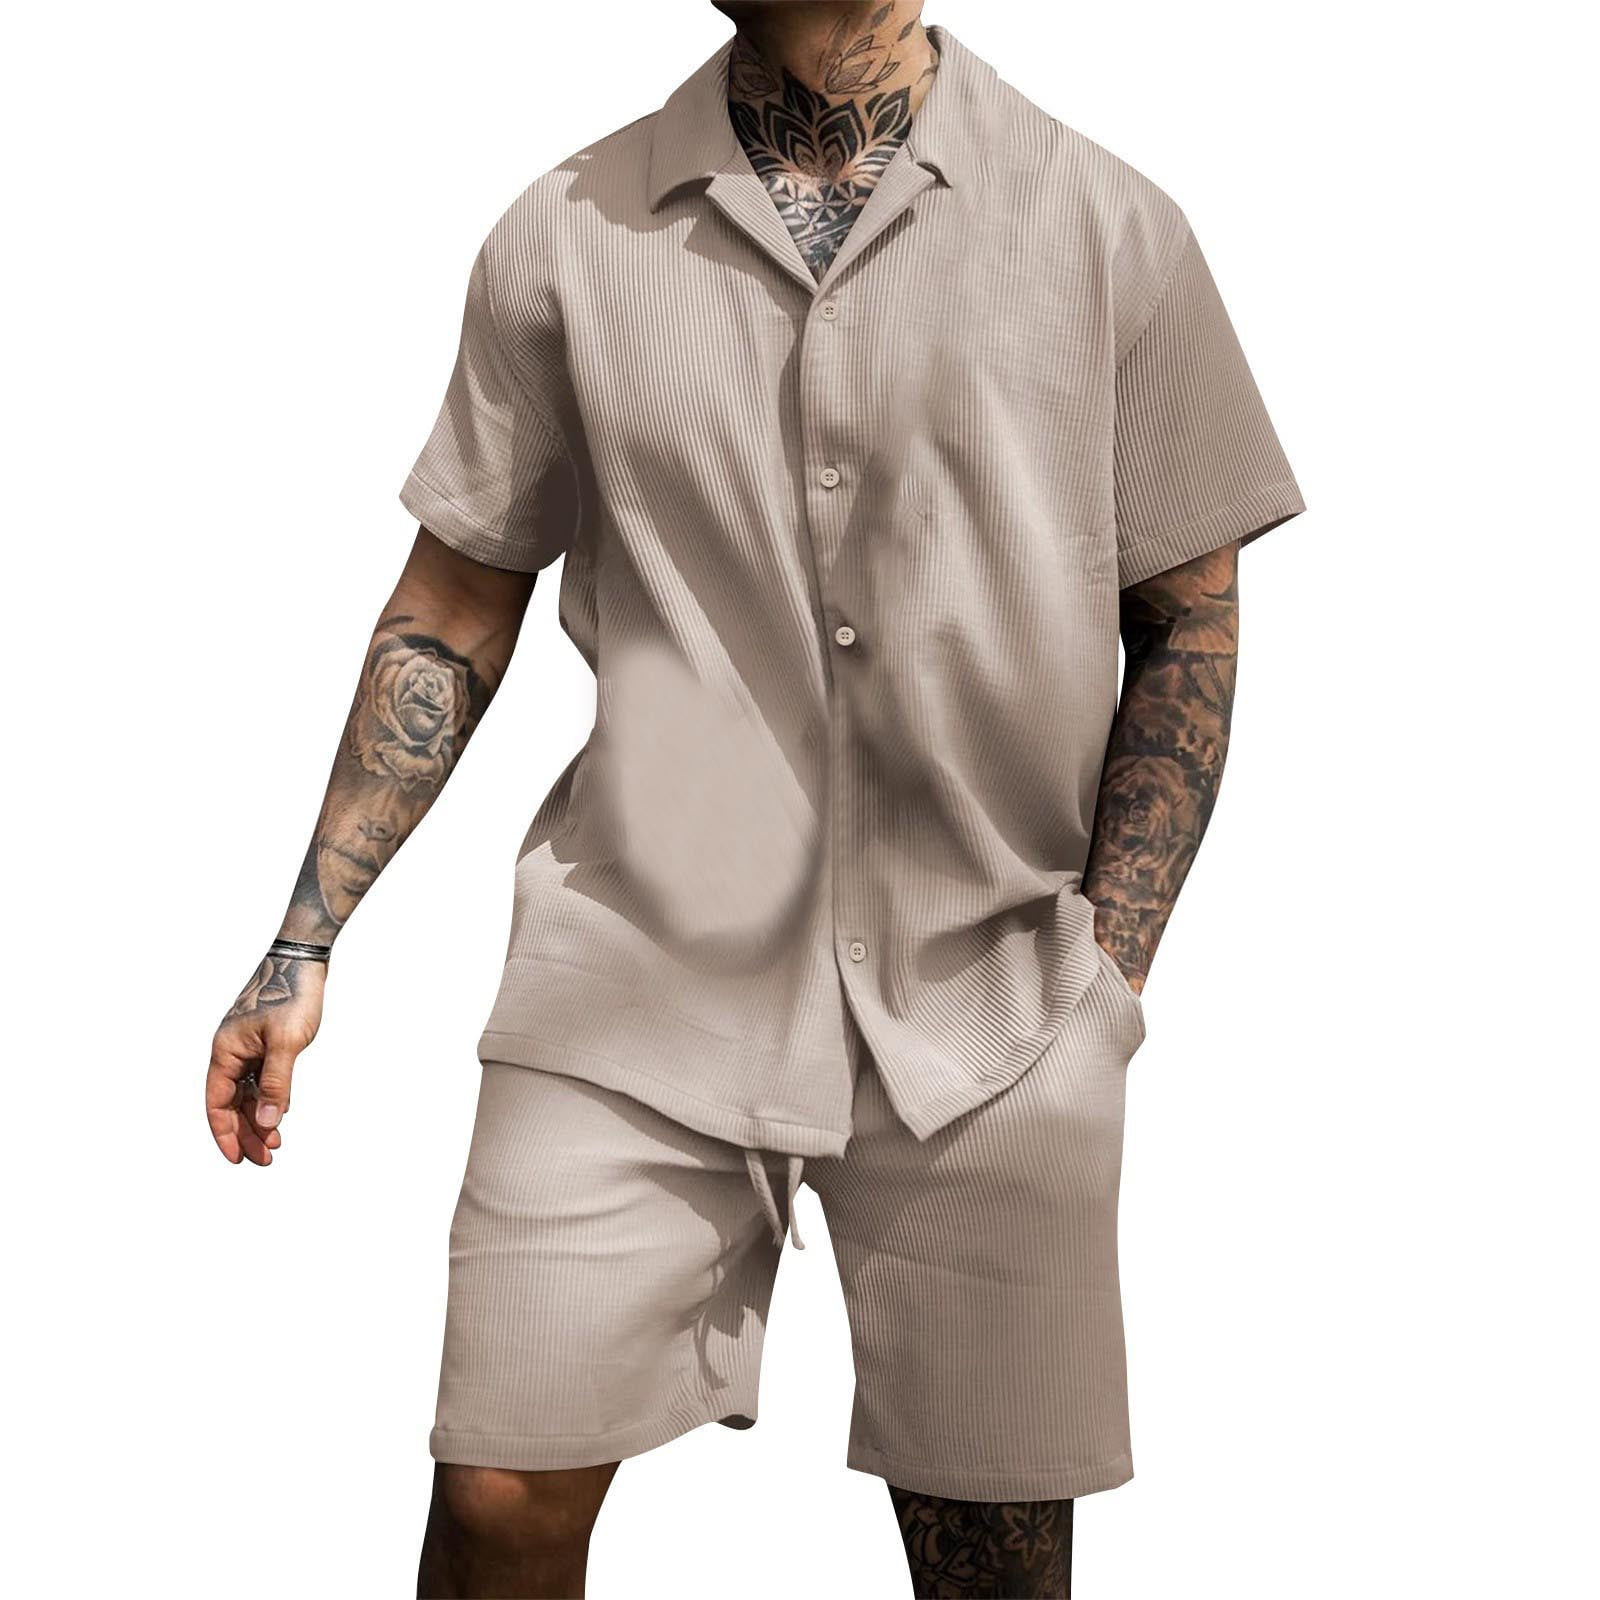 BSDHBS Outfits for Men Male Summer Top Shirt and Shorts Set 2